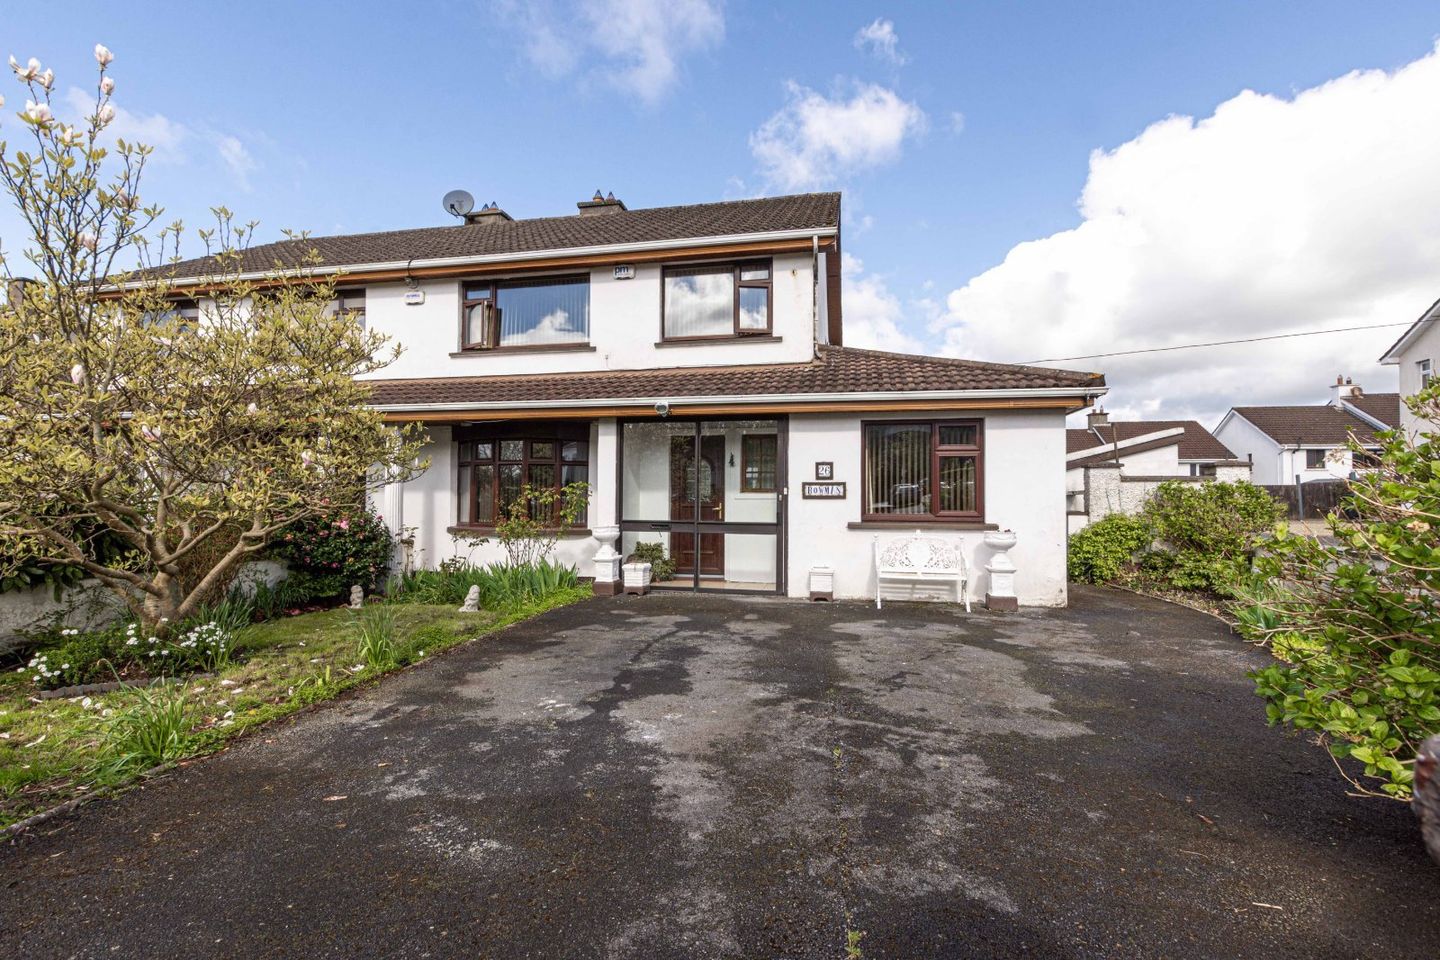 26 Ferndale, Ballytruckle, Waterford City, Co. Waterford, X91NRT6